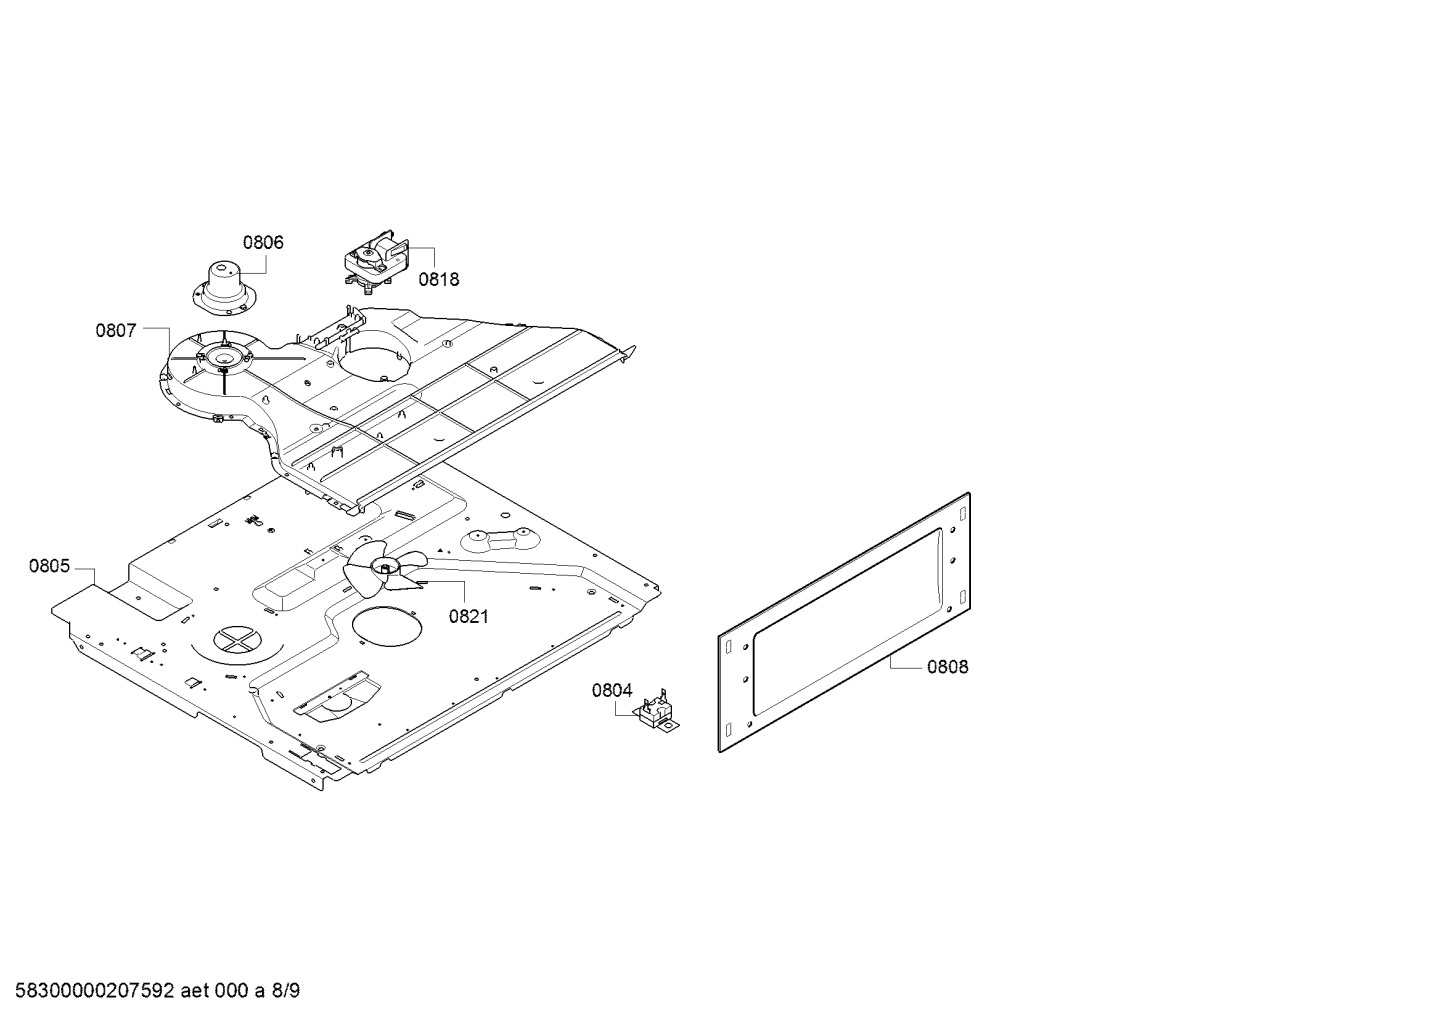 drawing_link_8_device_1823984